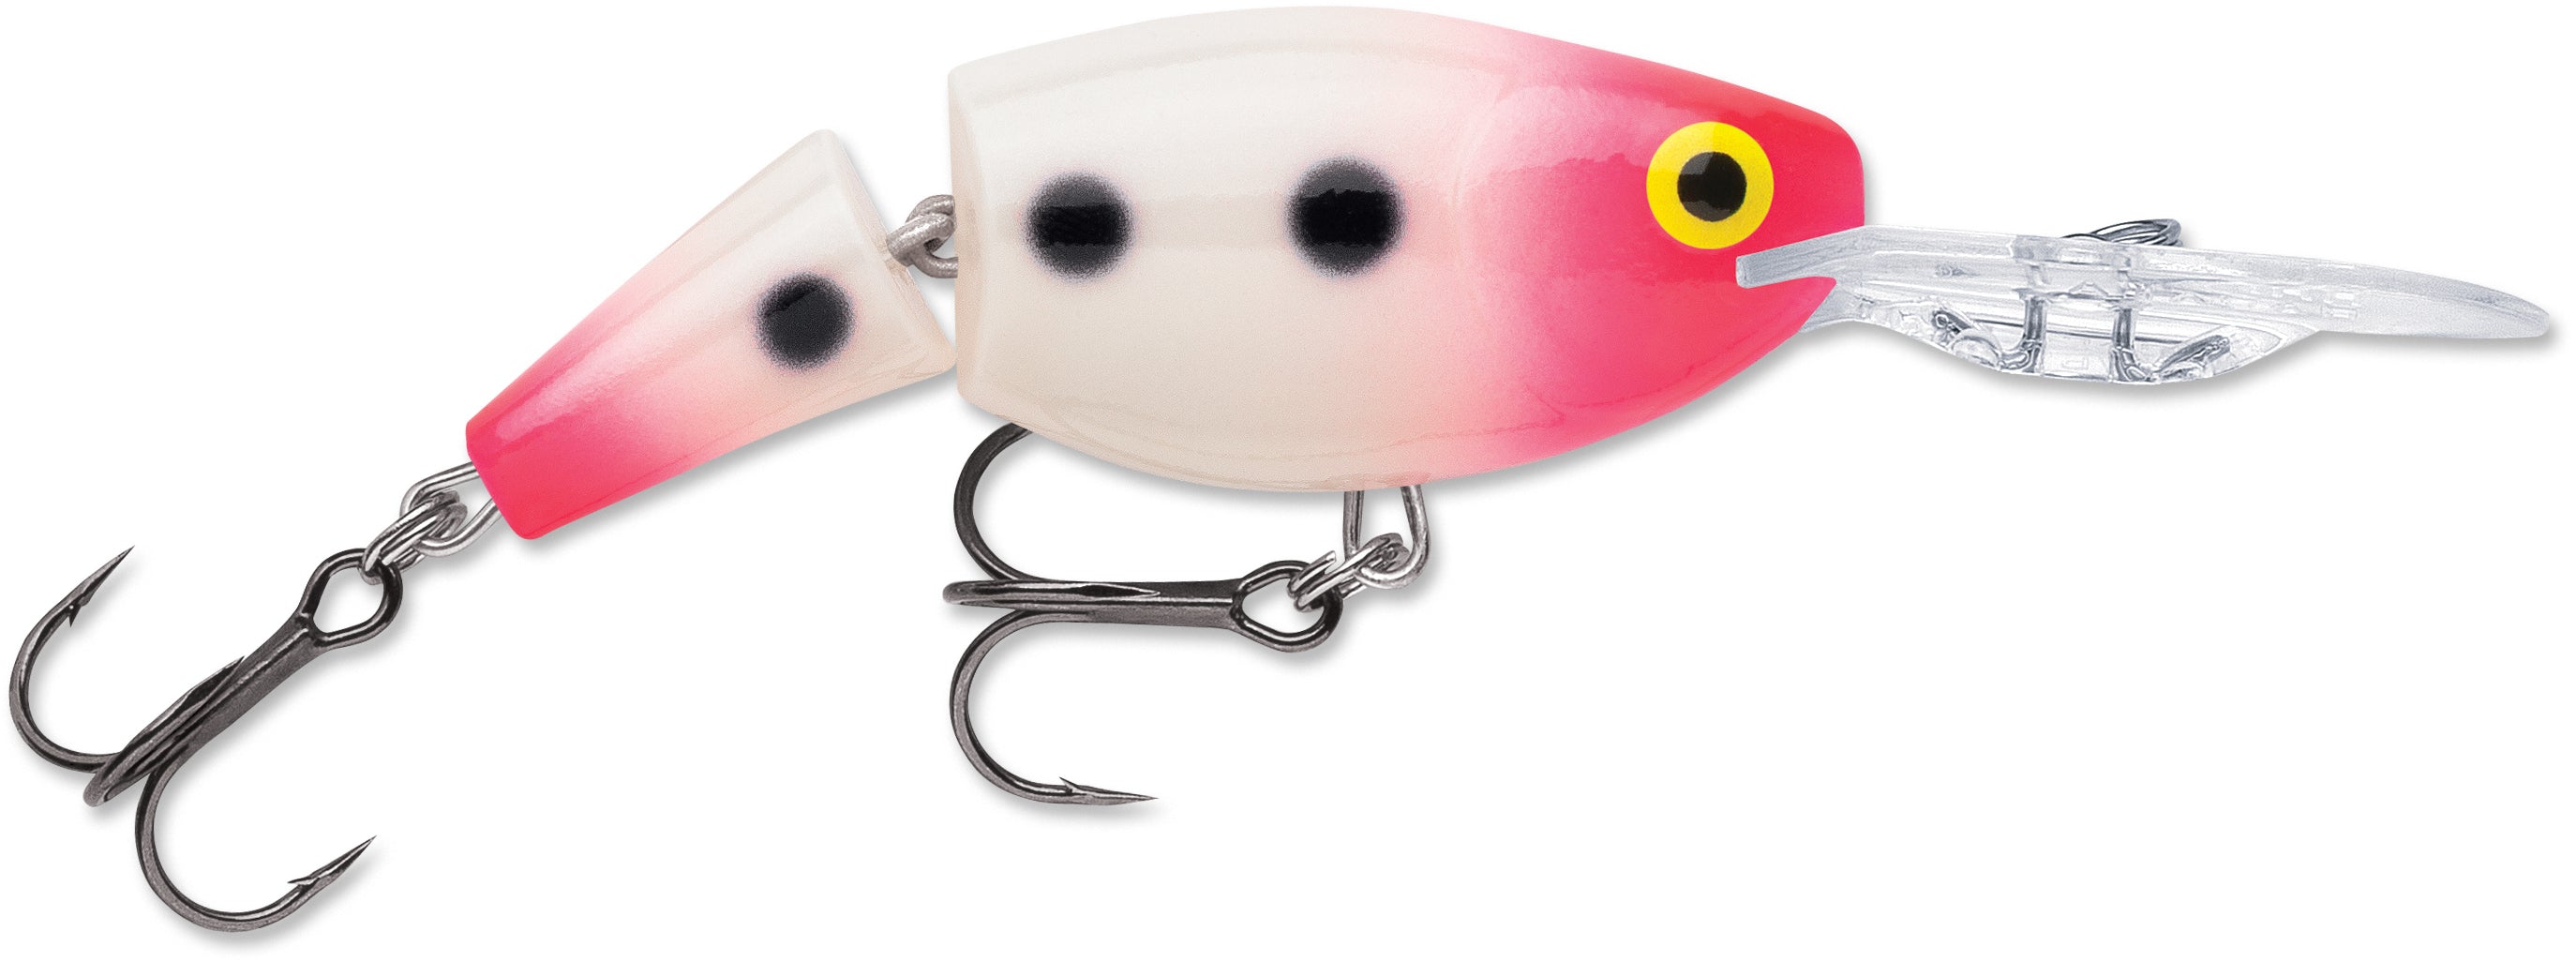 13cm Rapala X-Rap Jointed Shad Diving Crankbait Fishing Lure